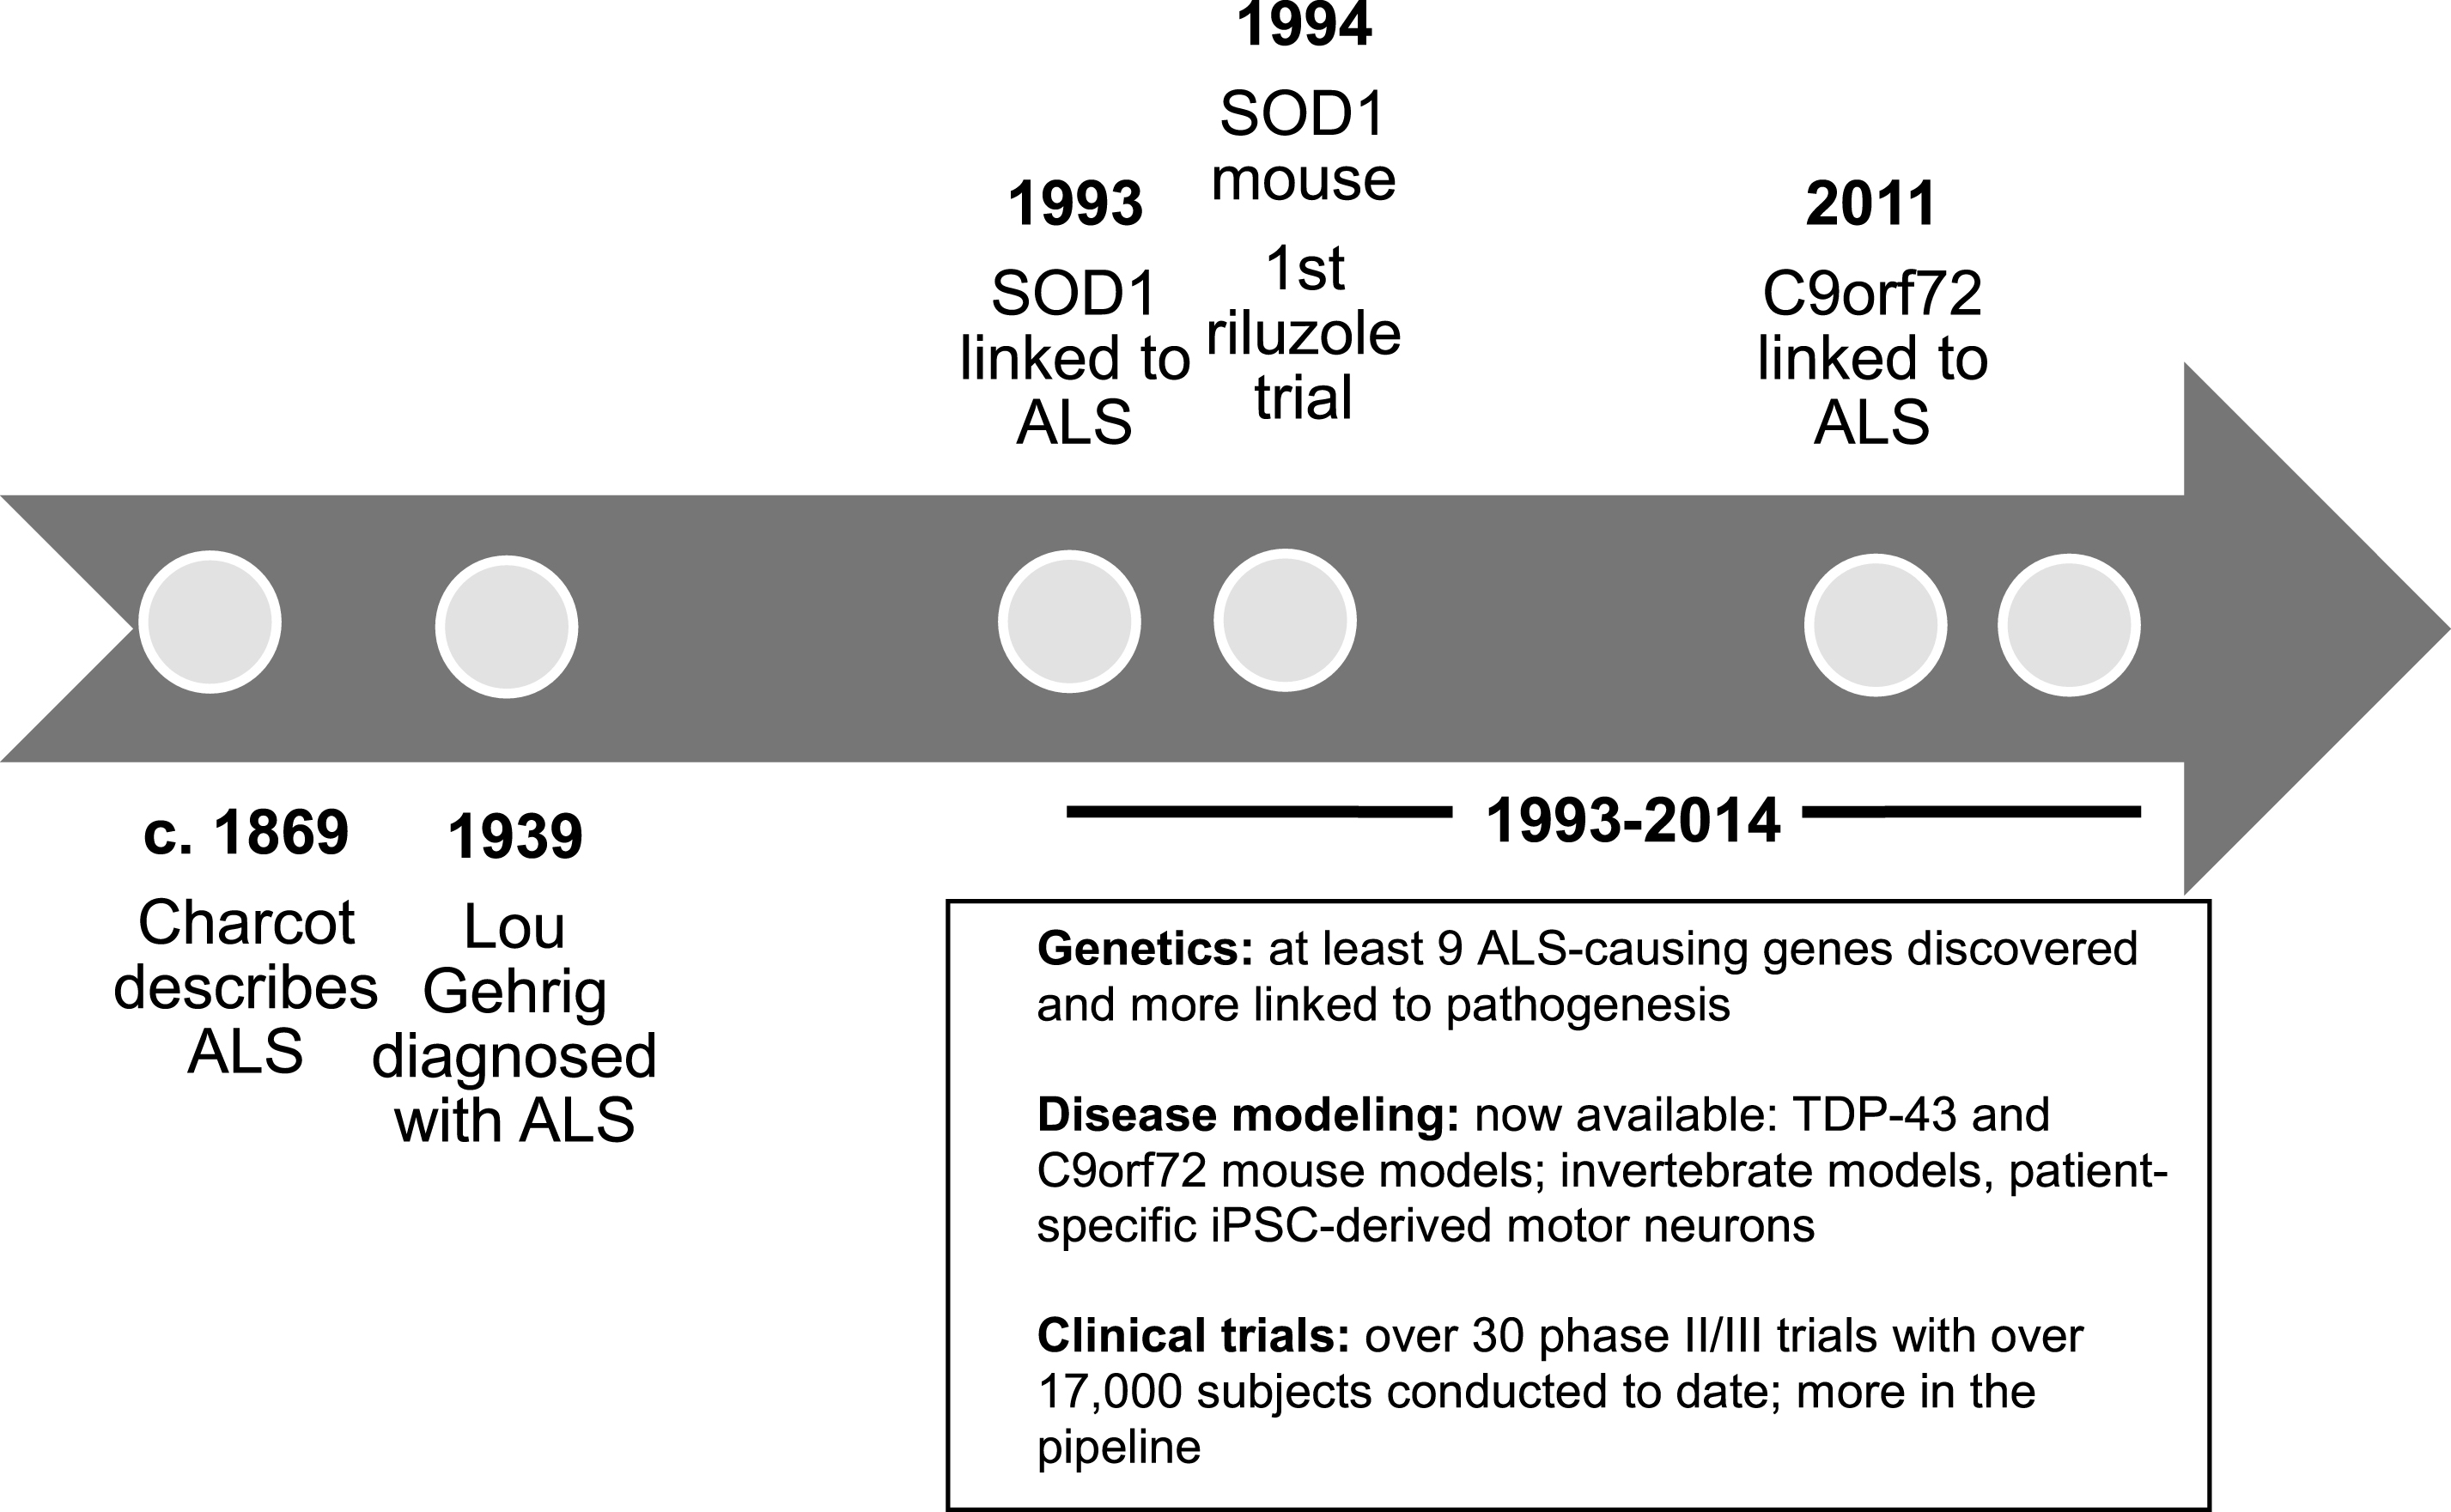 Timeline of ALS research. Abbreviations: C9orf72: chromosome 9 open reading frame 72; iPSC: induced pluripotent stem cells; SOD1: copper zinc superoxide dismutase 1; TDP-43: TAR DNA-binding protein 43.